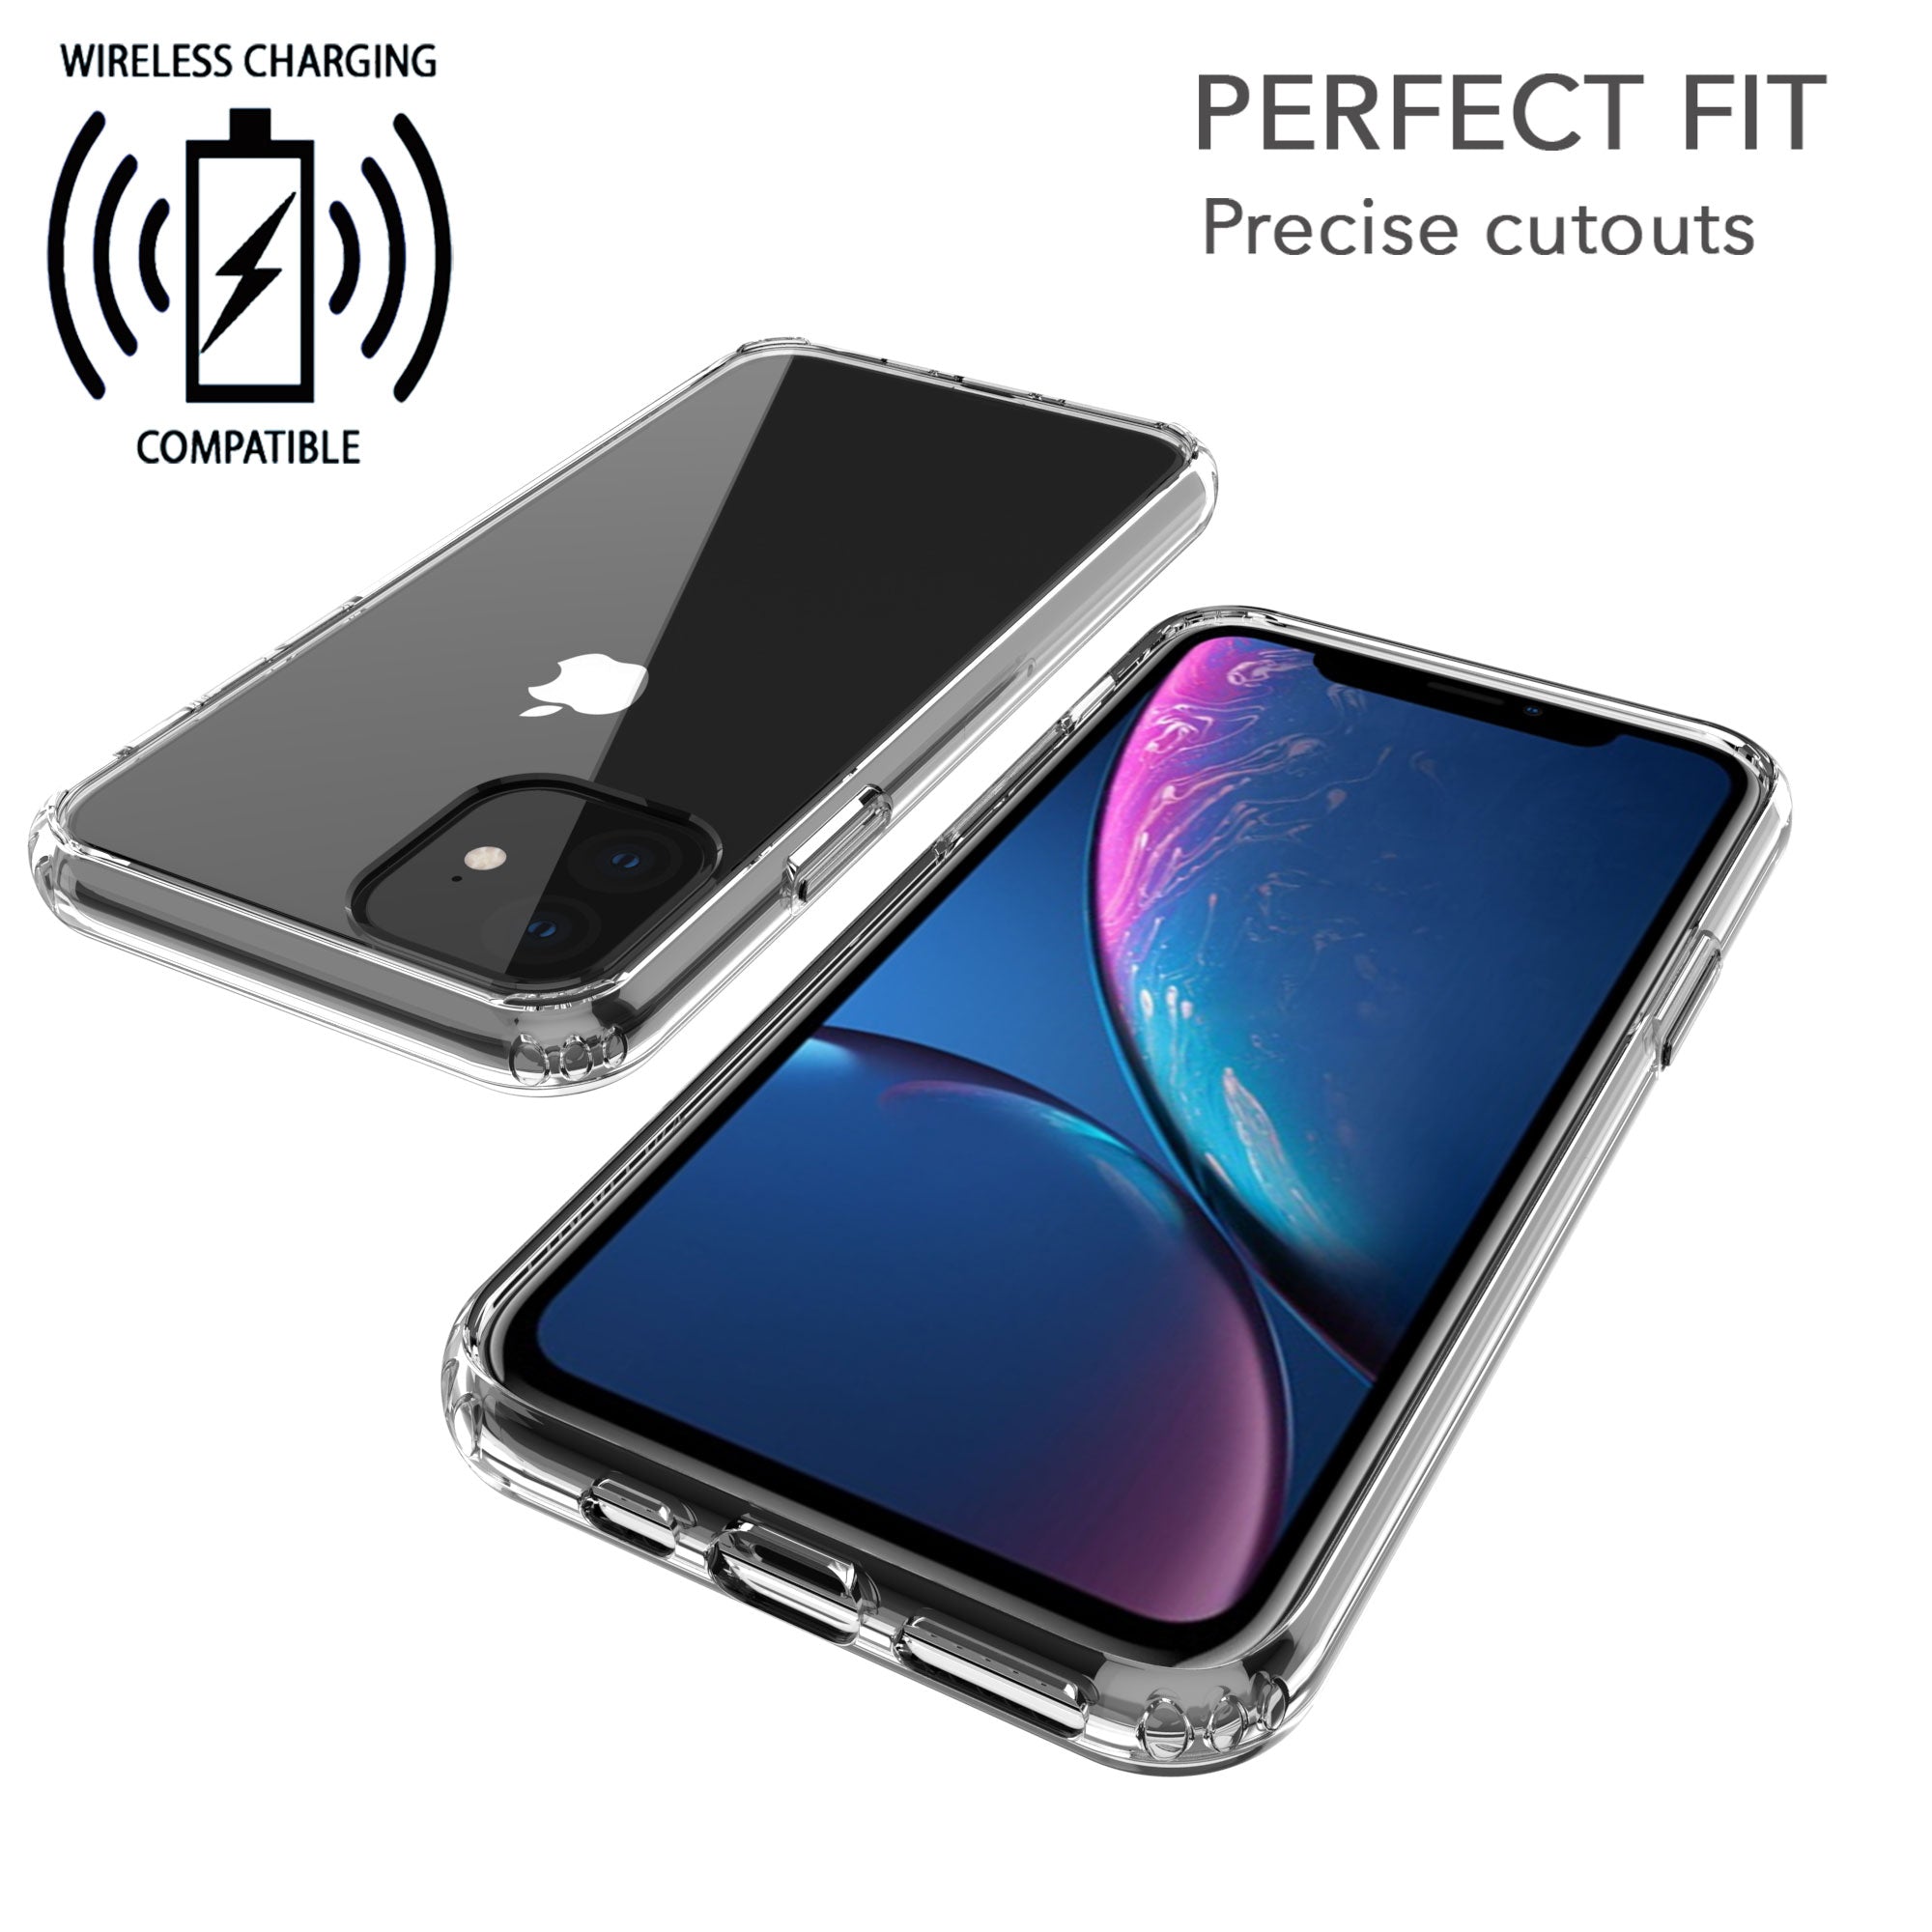 Luvvitt Clear View Case and Liquid Glass Screen Protector Bundle for iPhone 11 2019